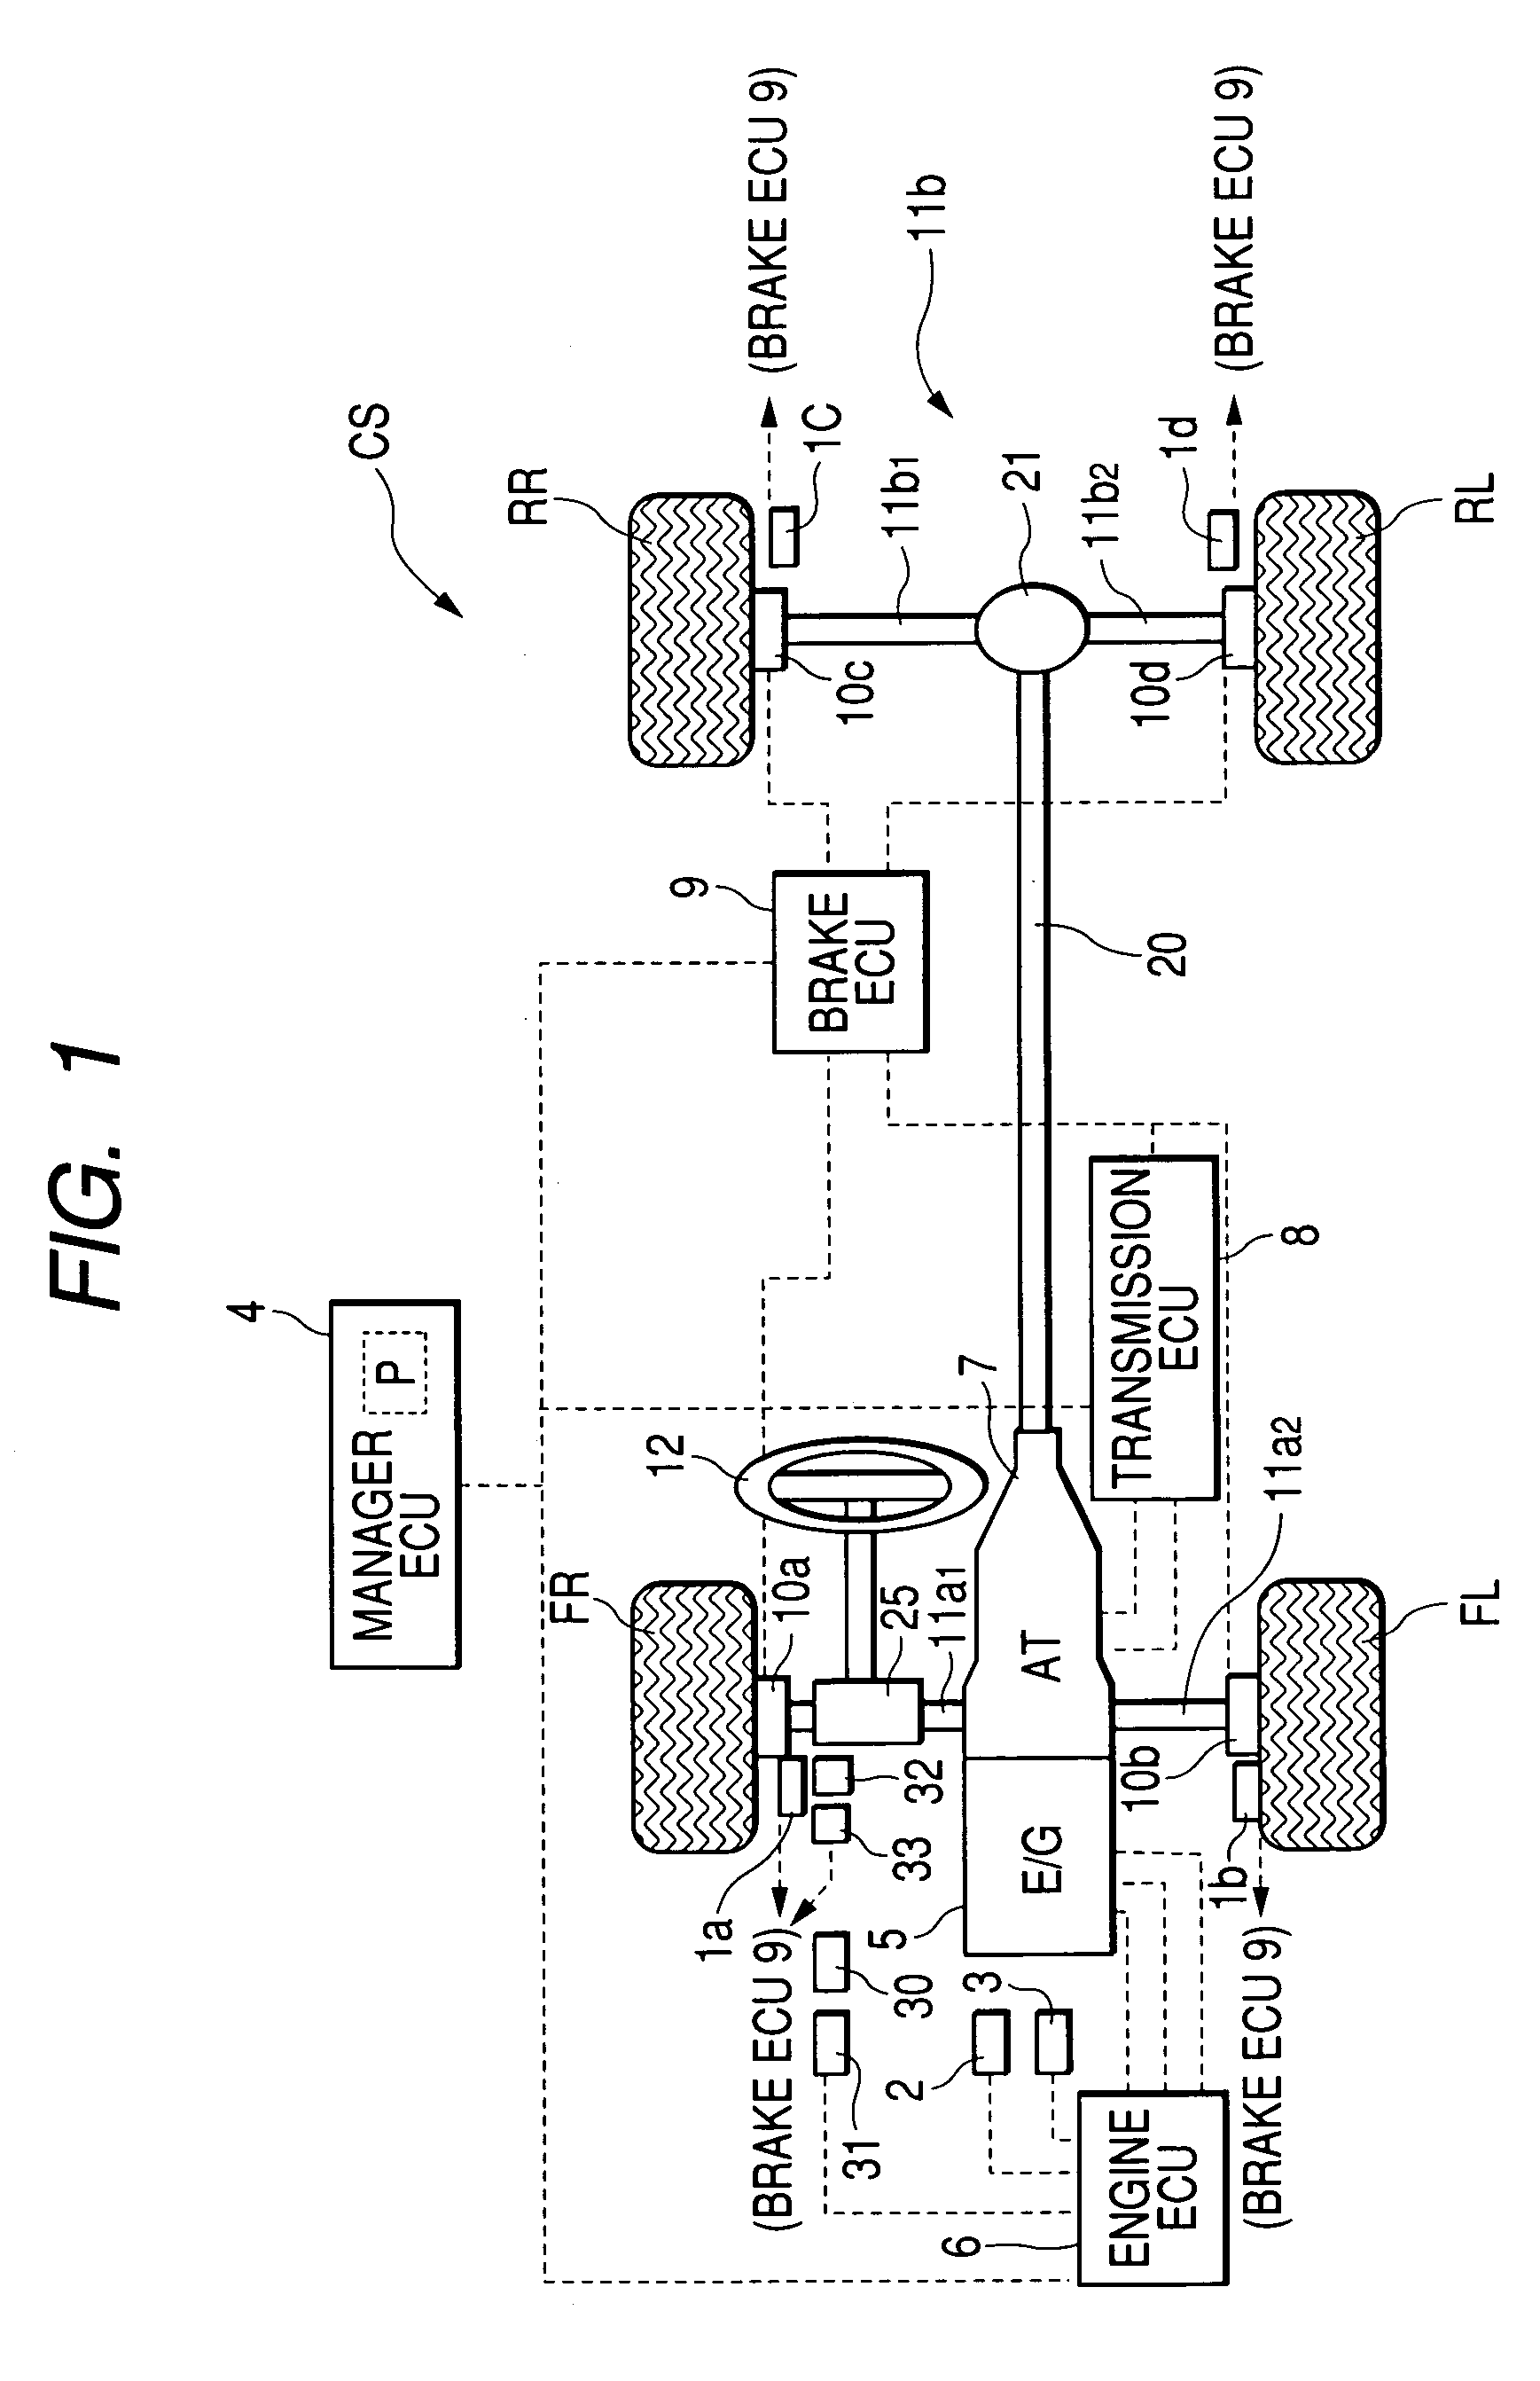 Driving condition control method and system